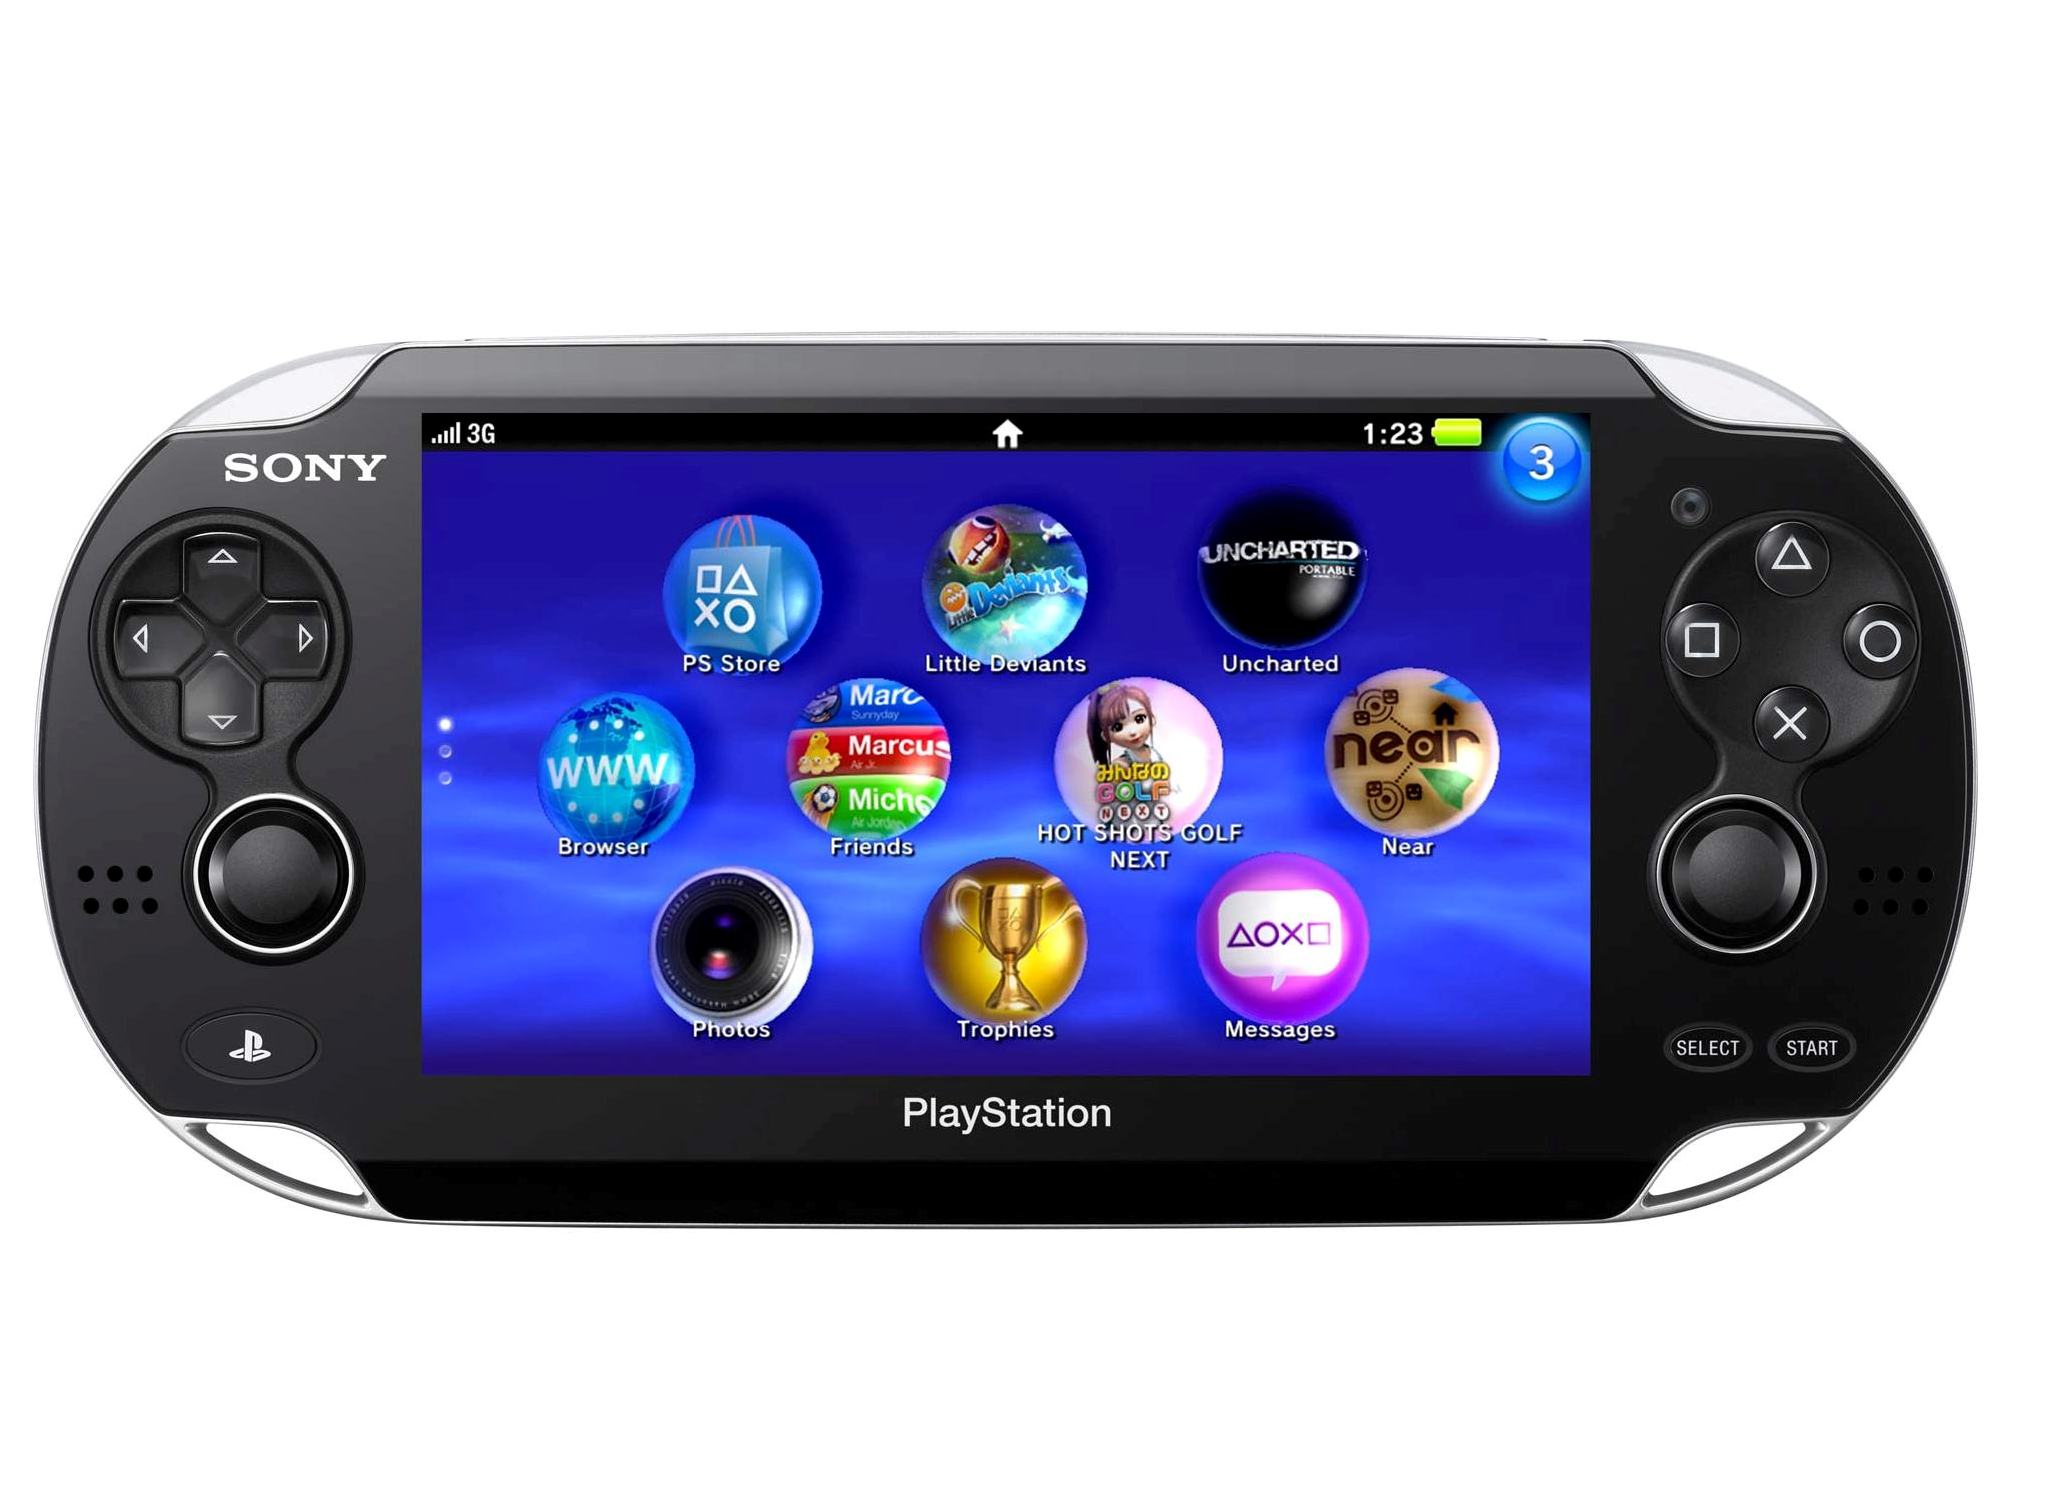 playstation portable devices